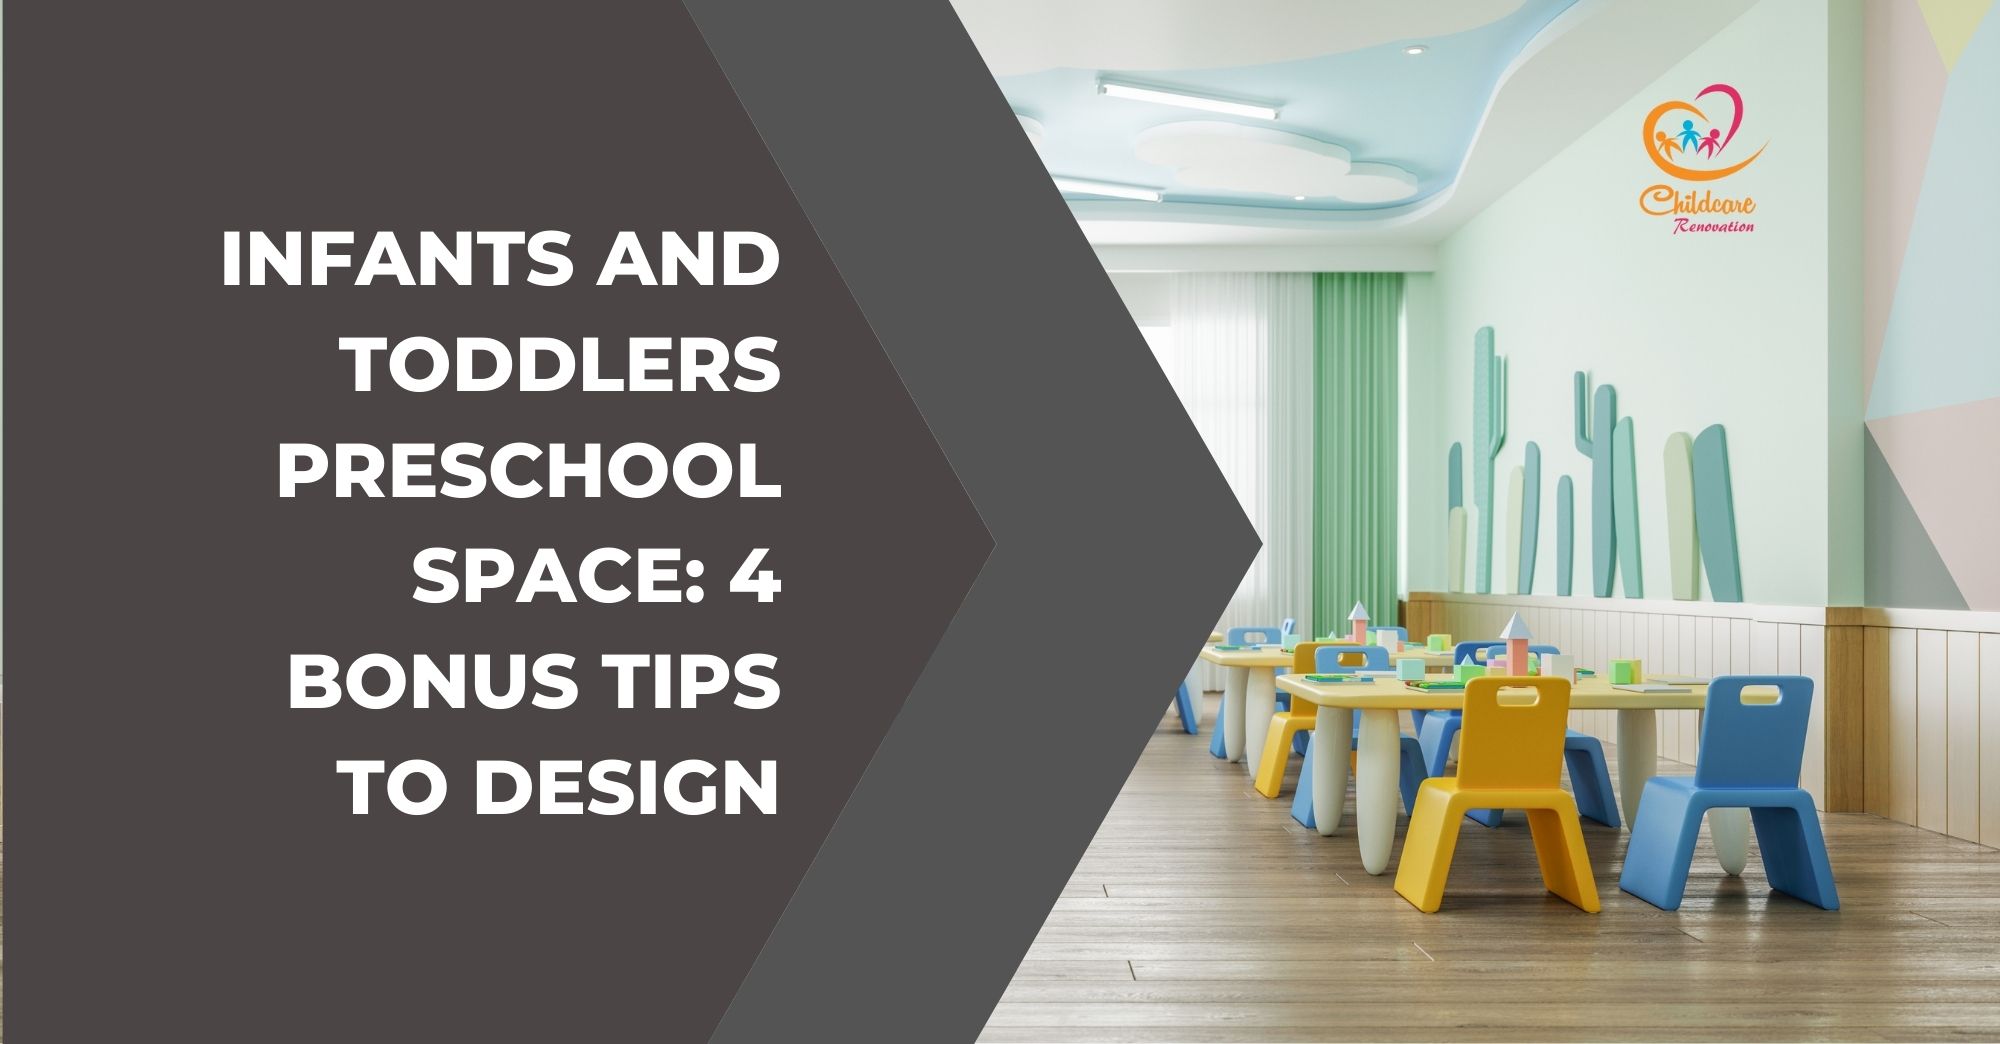 Infants And Toddlers Preschool Space: 4 Bonus Tips To Design